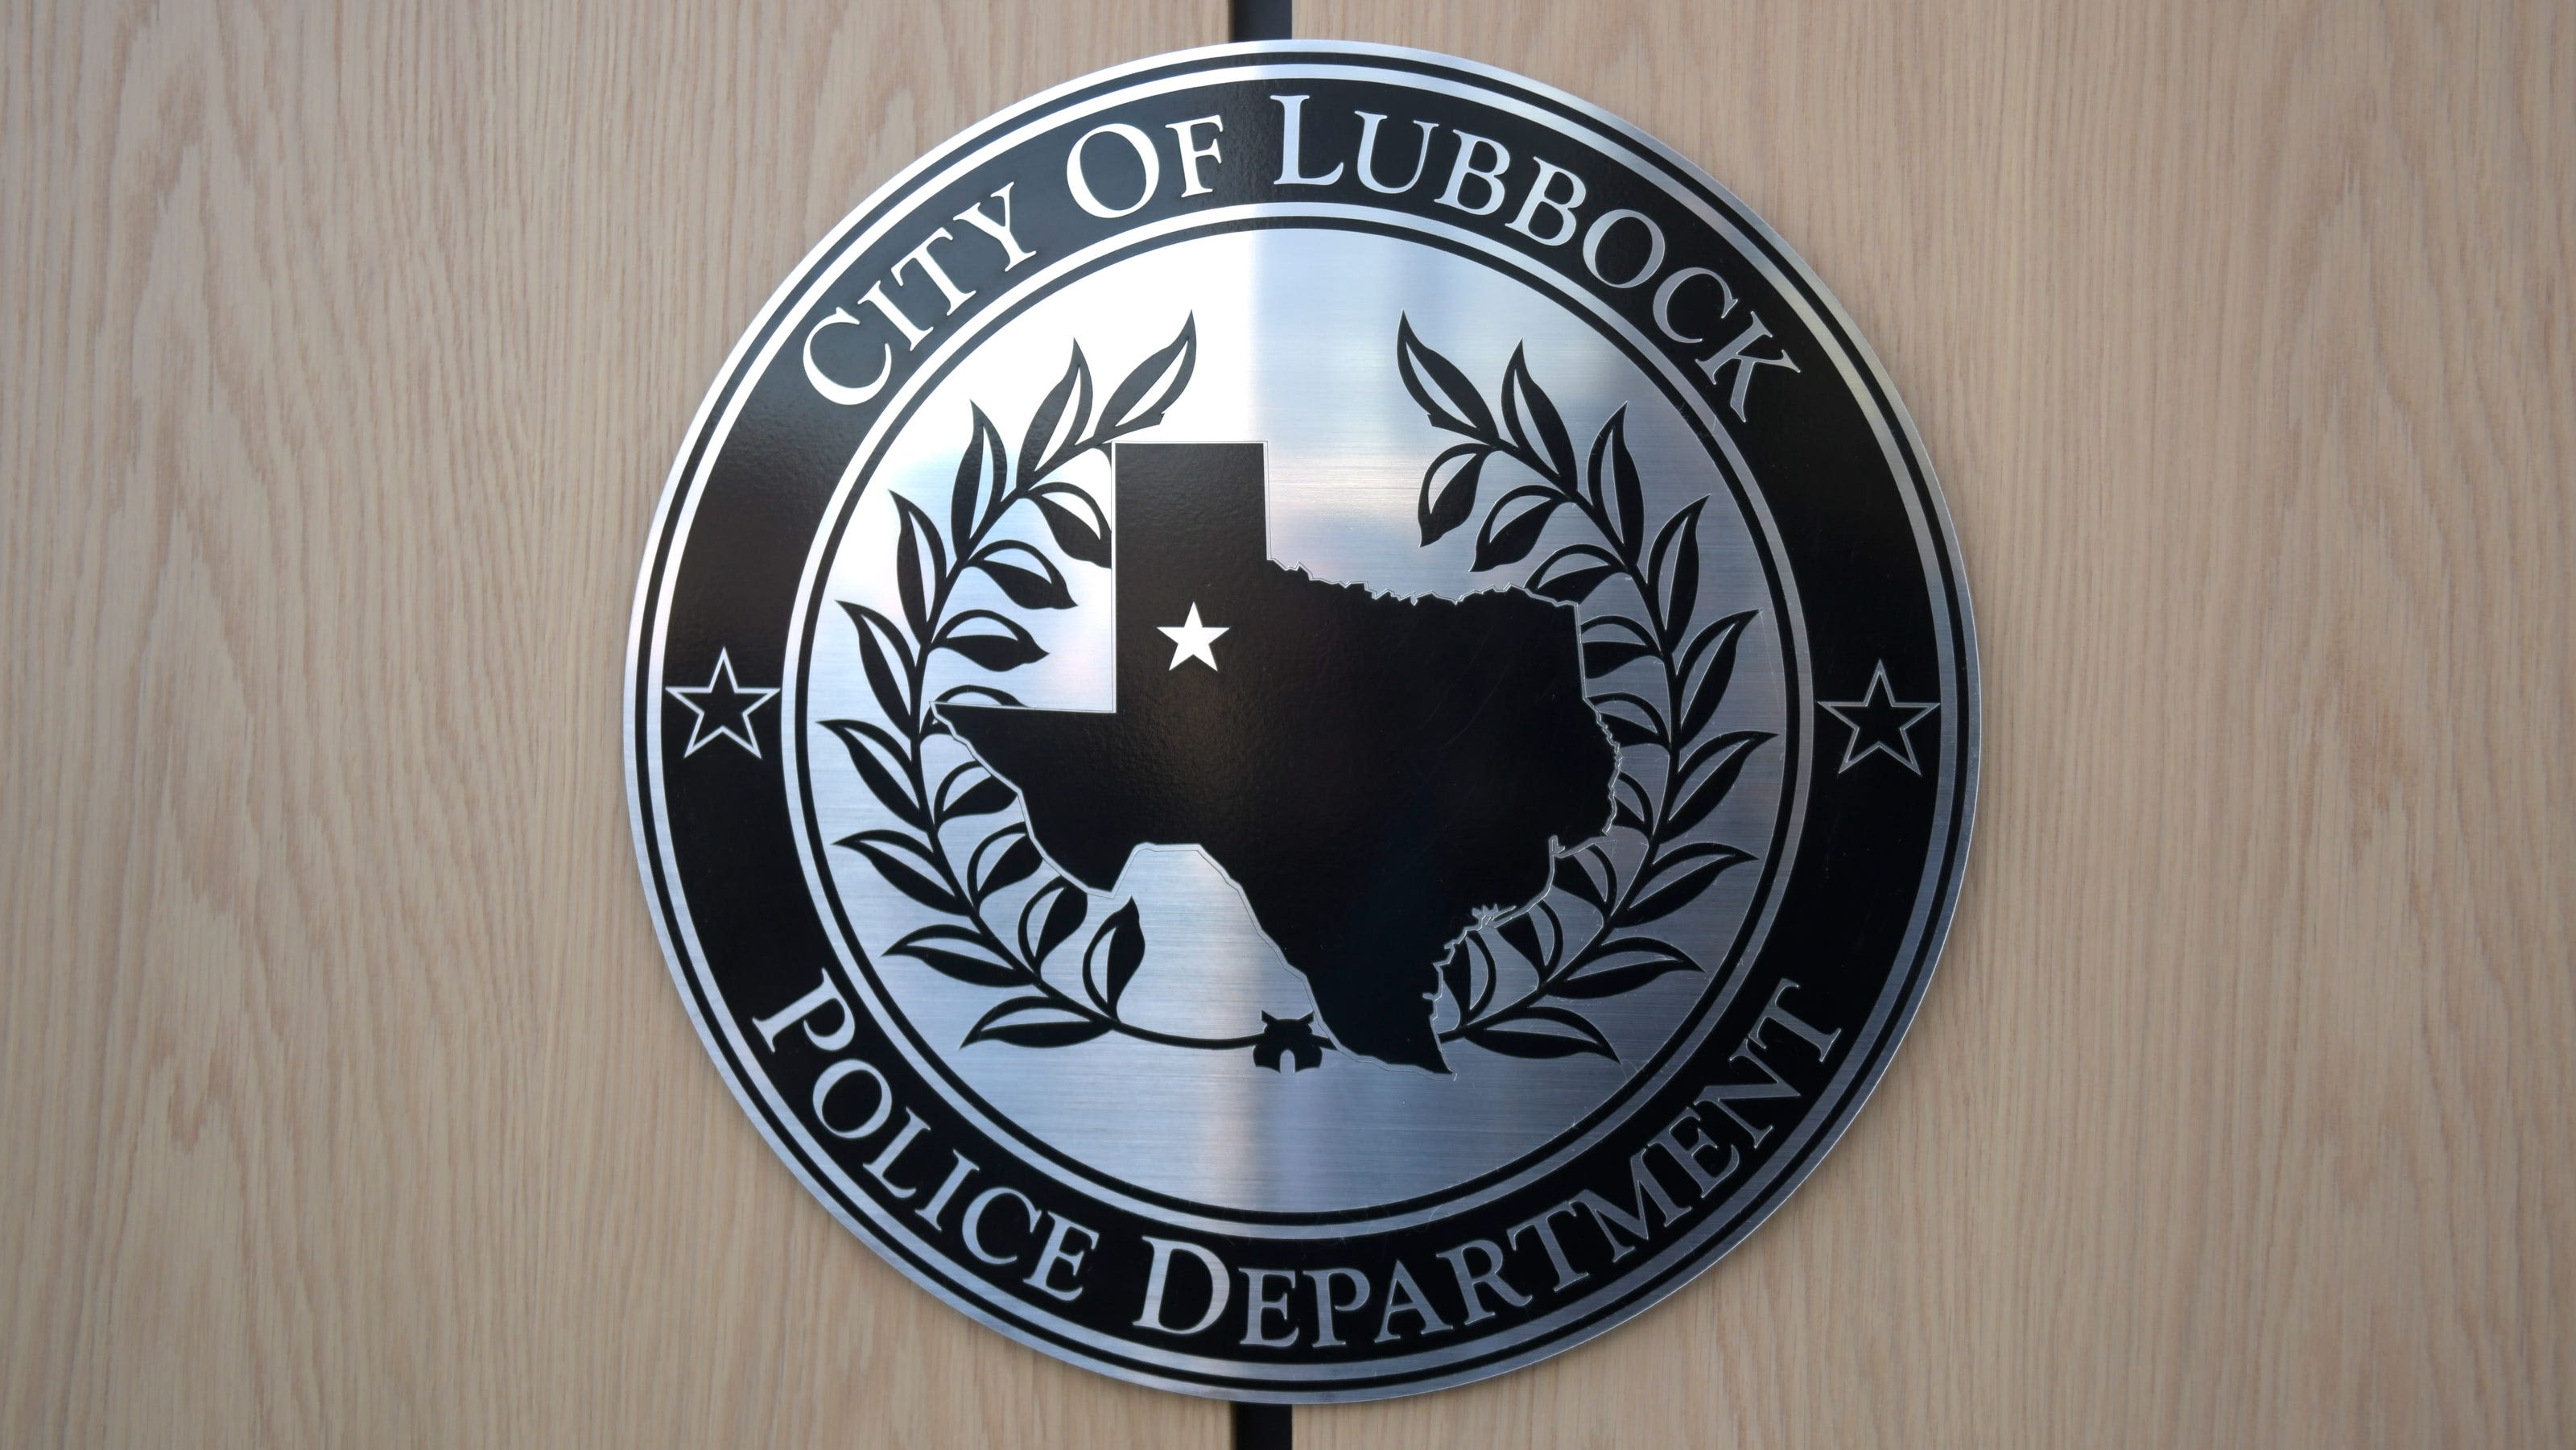 Police name 1 arrested, 1 injured after shooting stemming from Lubbock gas station fight